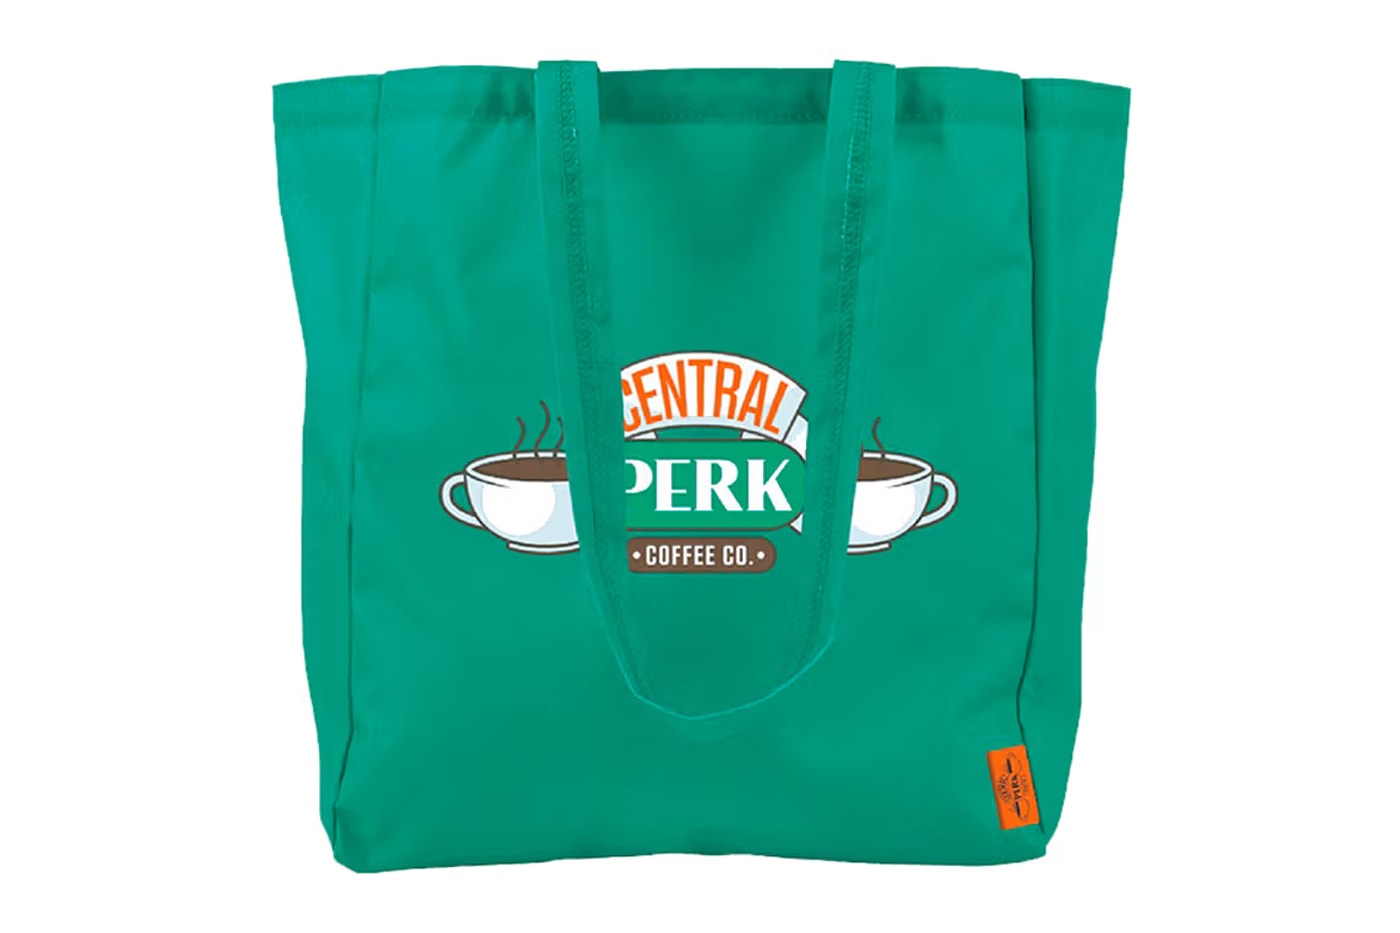 Central Perk Coffee Co. To Open Its First IRL Coffeehouse in Boston phoebe rachel monica chandler ross joey friends top chef top collochio bravo cafe company television show tv new york city back bay nyc brooklyn queens manhattan